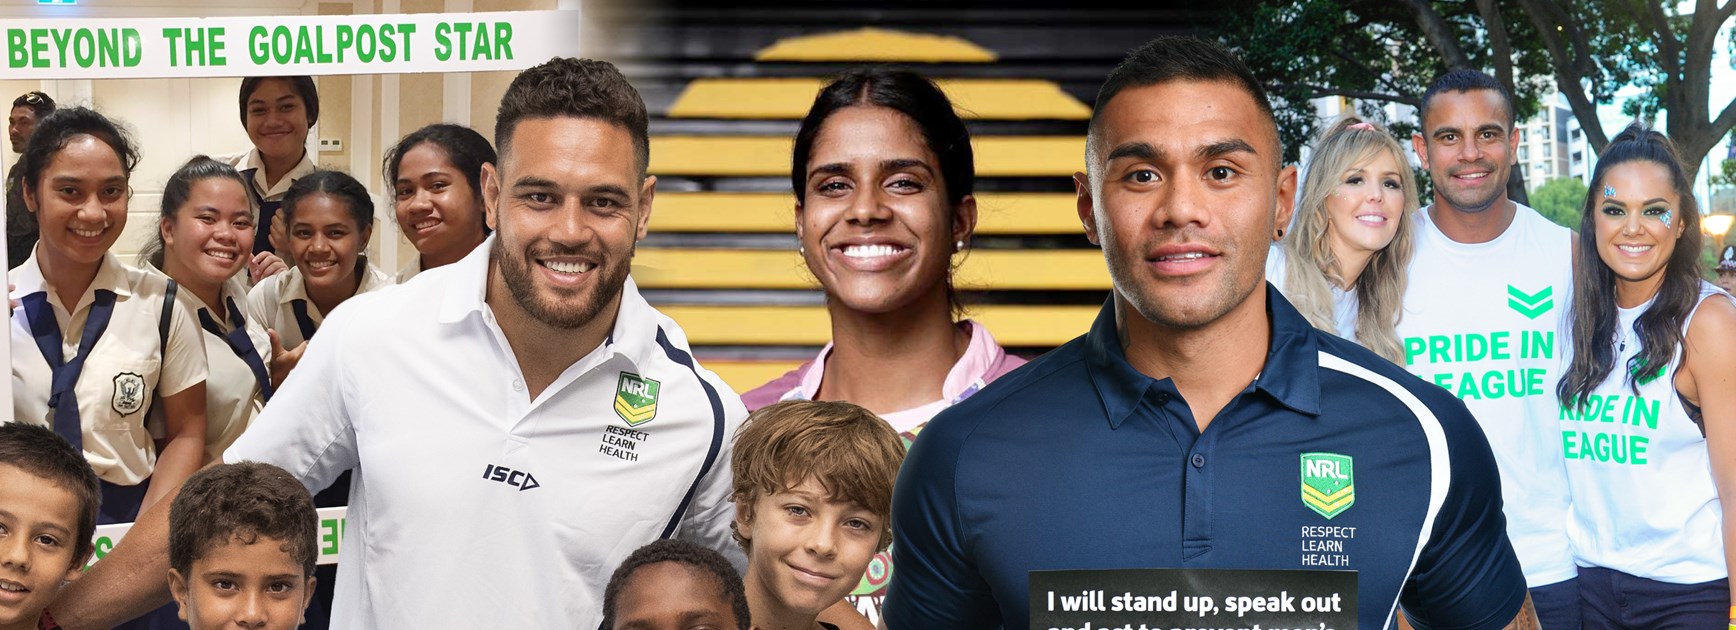 The off-field impact that the NRL can be proud of